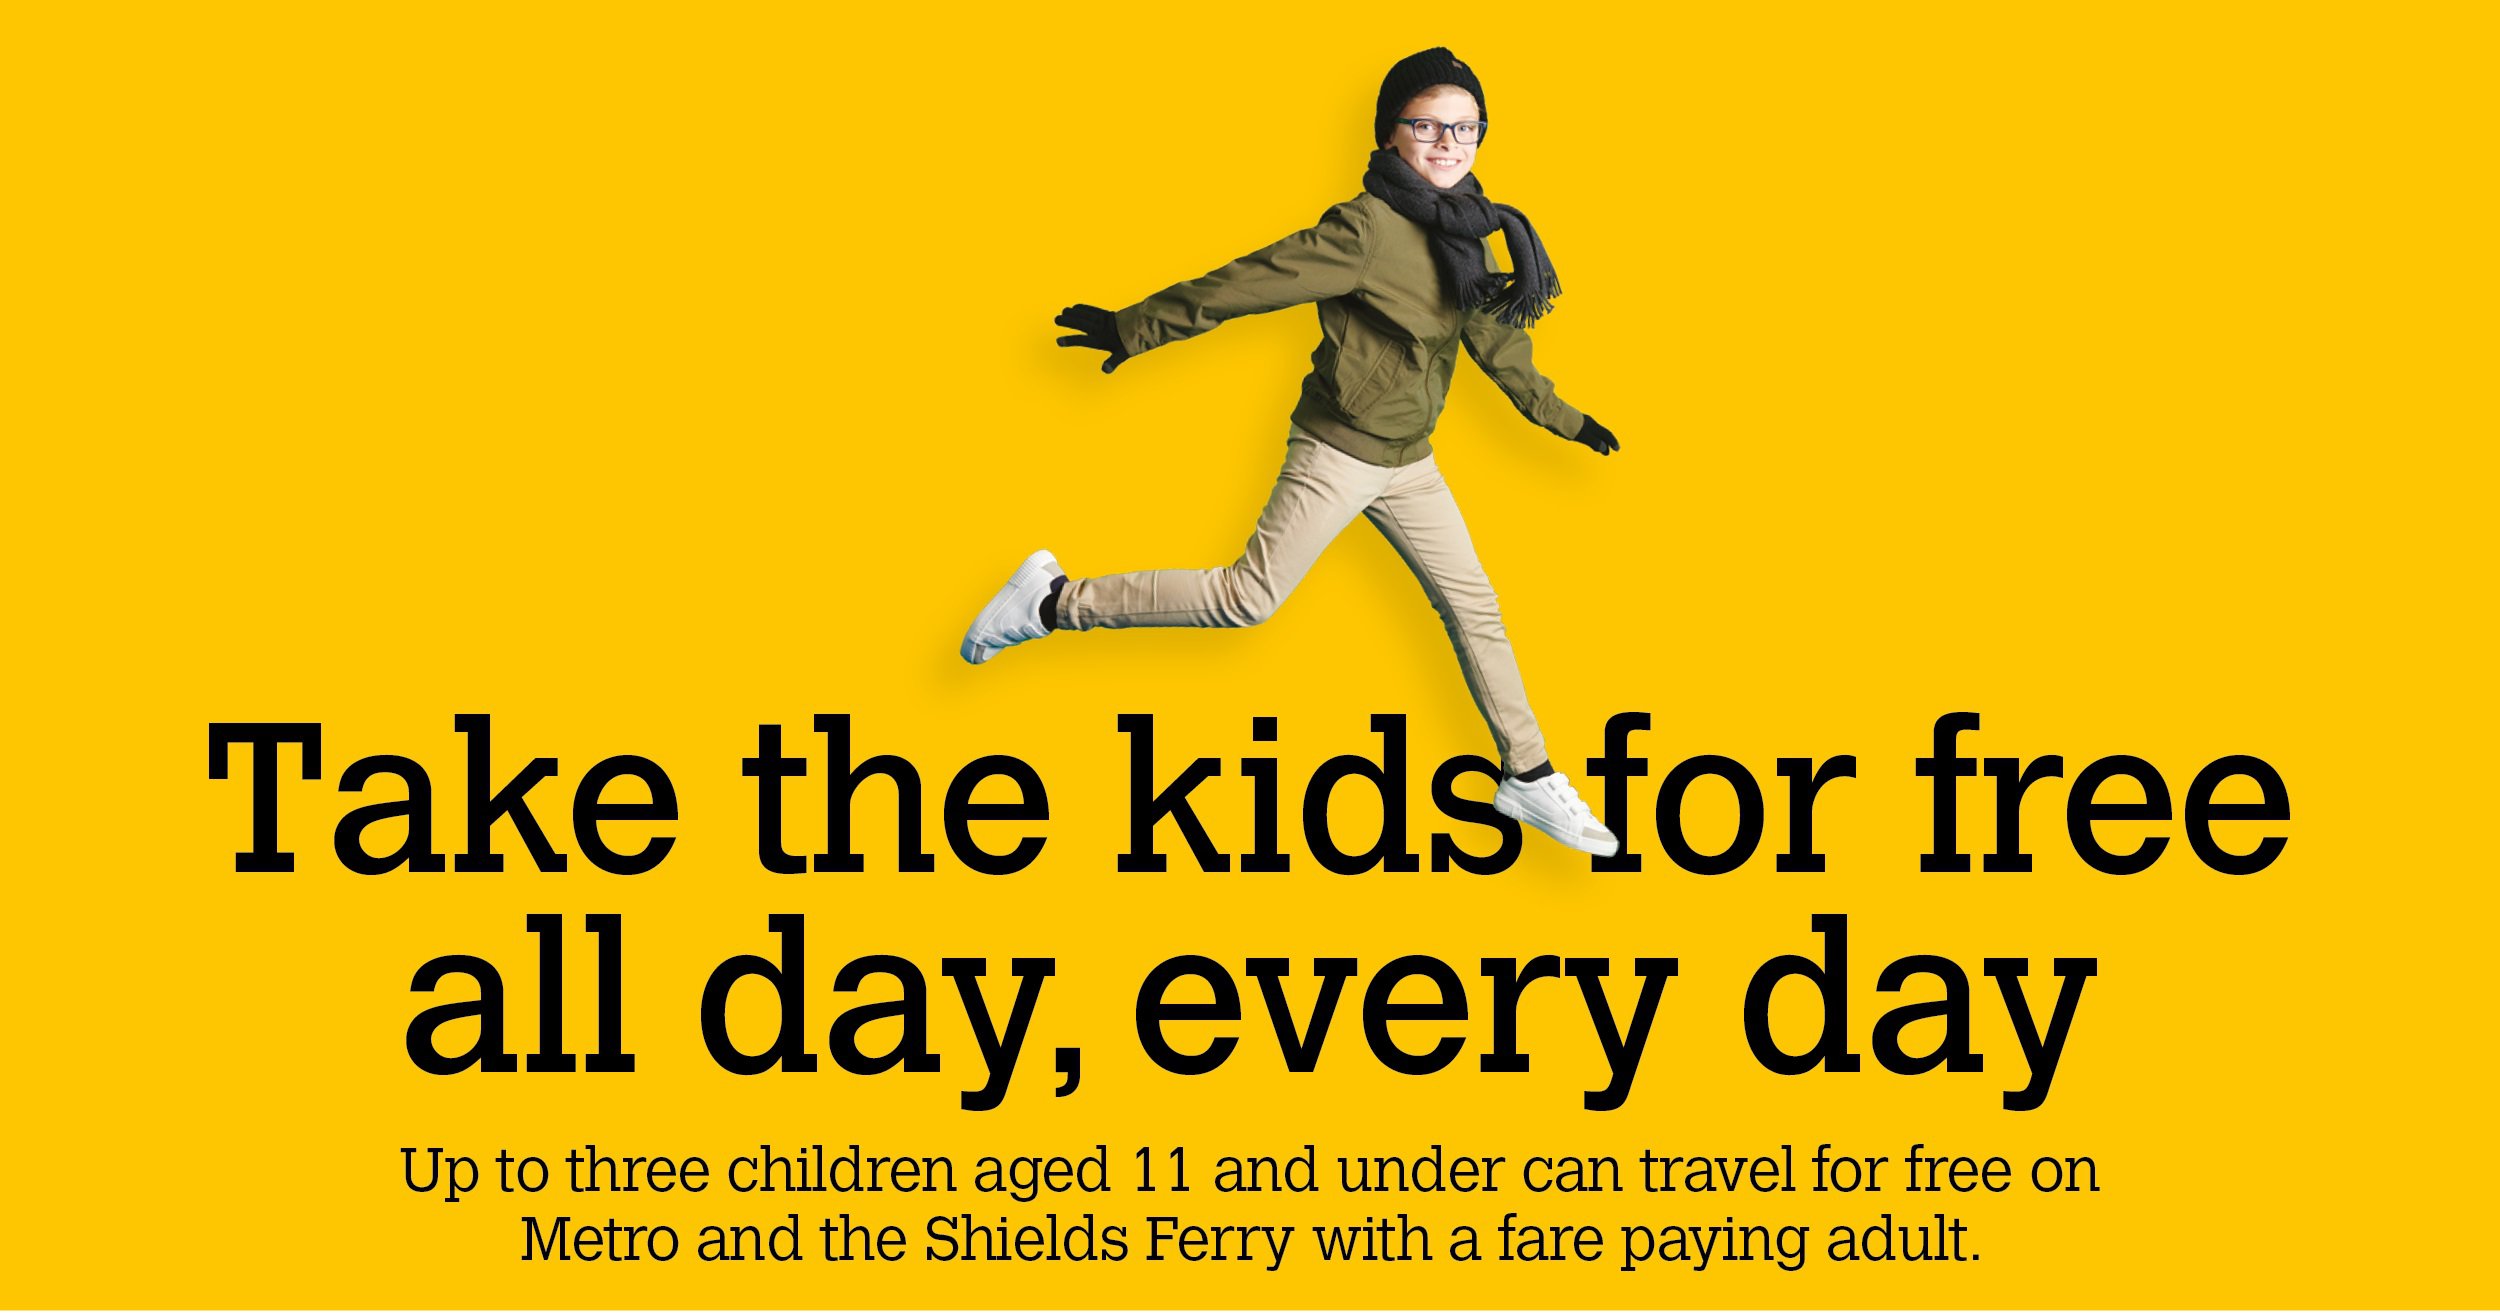 Metro "Take the kids for free all day, every day"